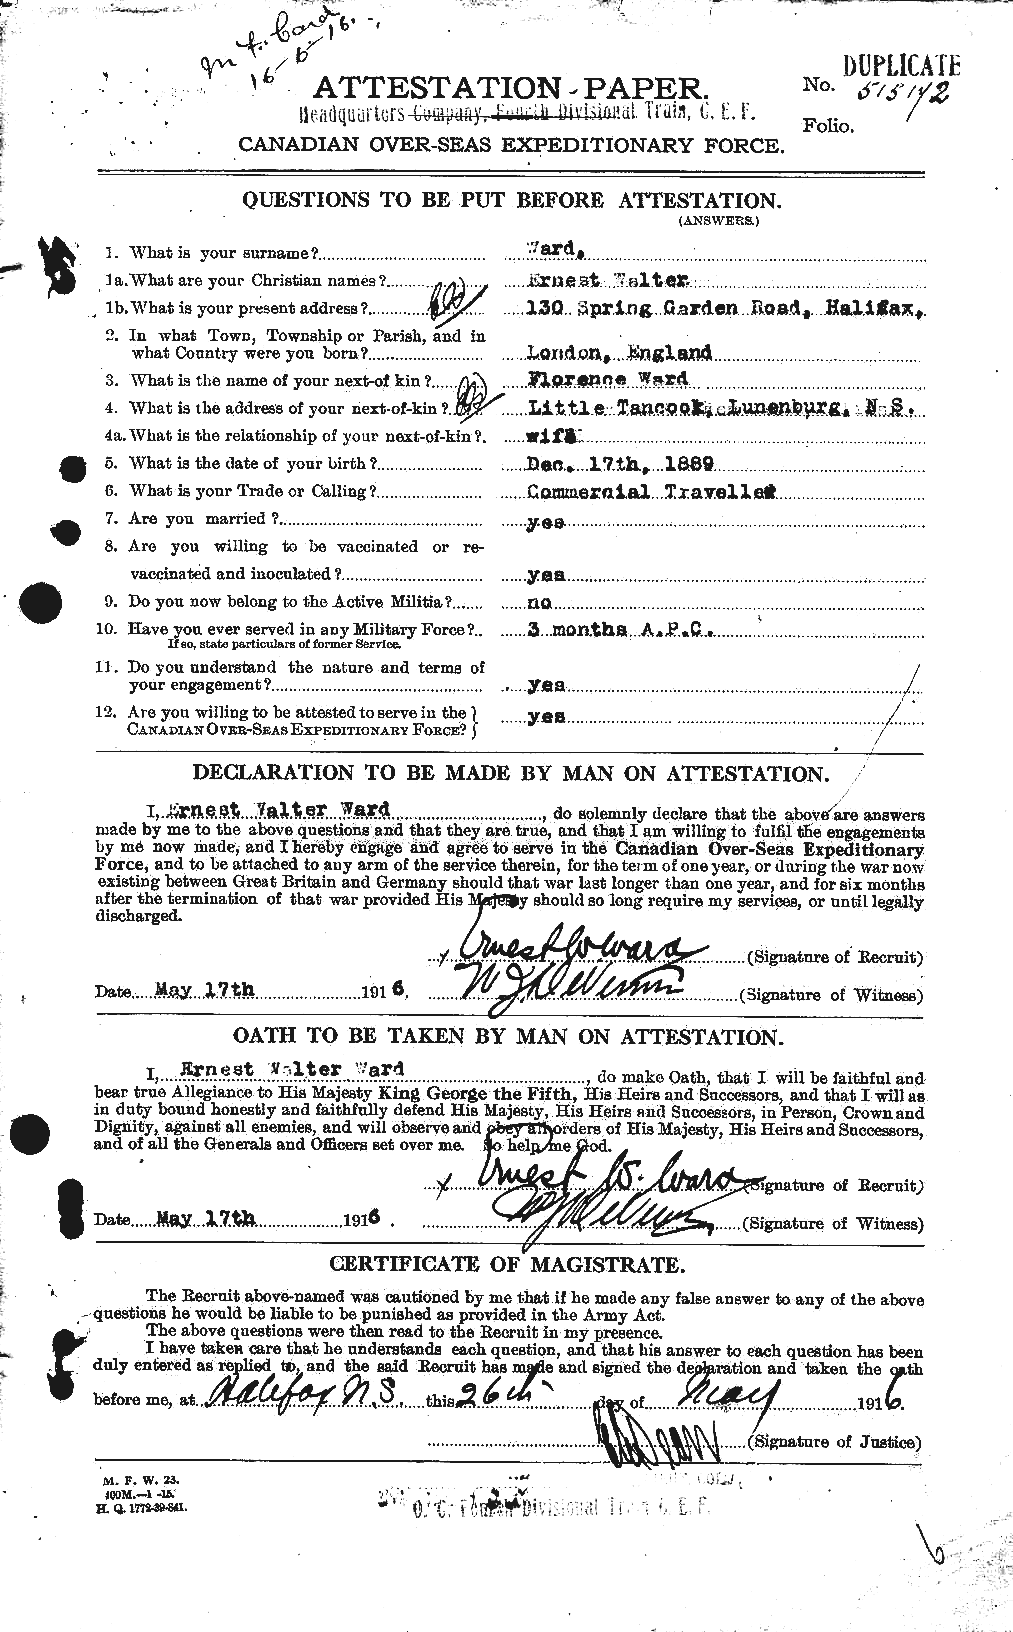 Personnel Records of the First World War - CEF 657673a